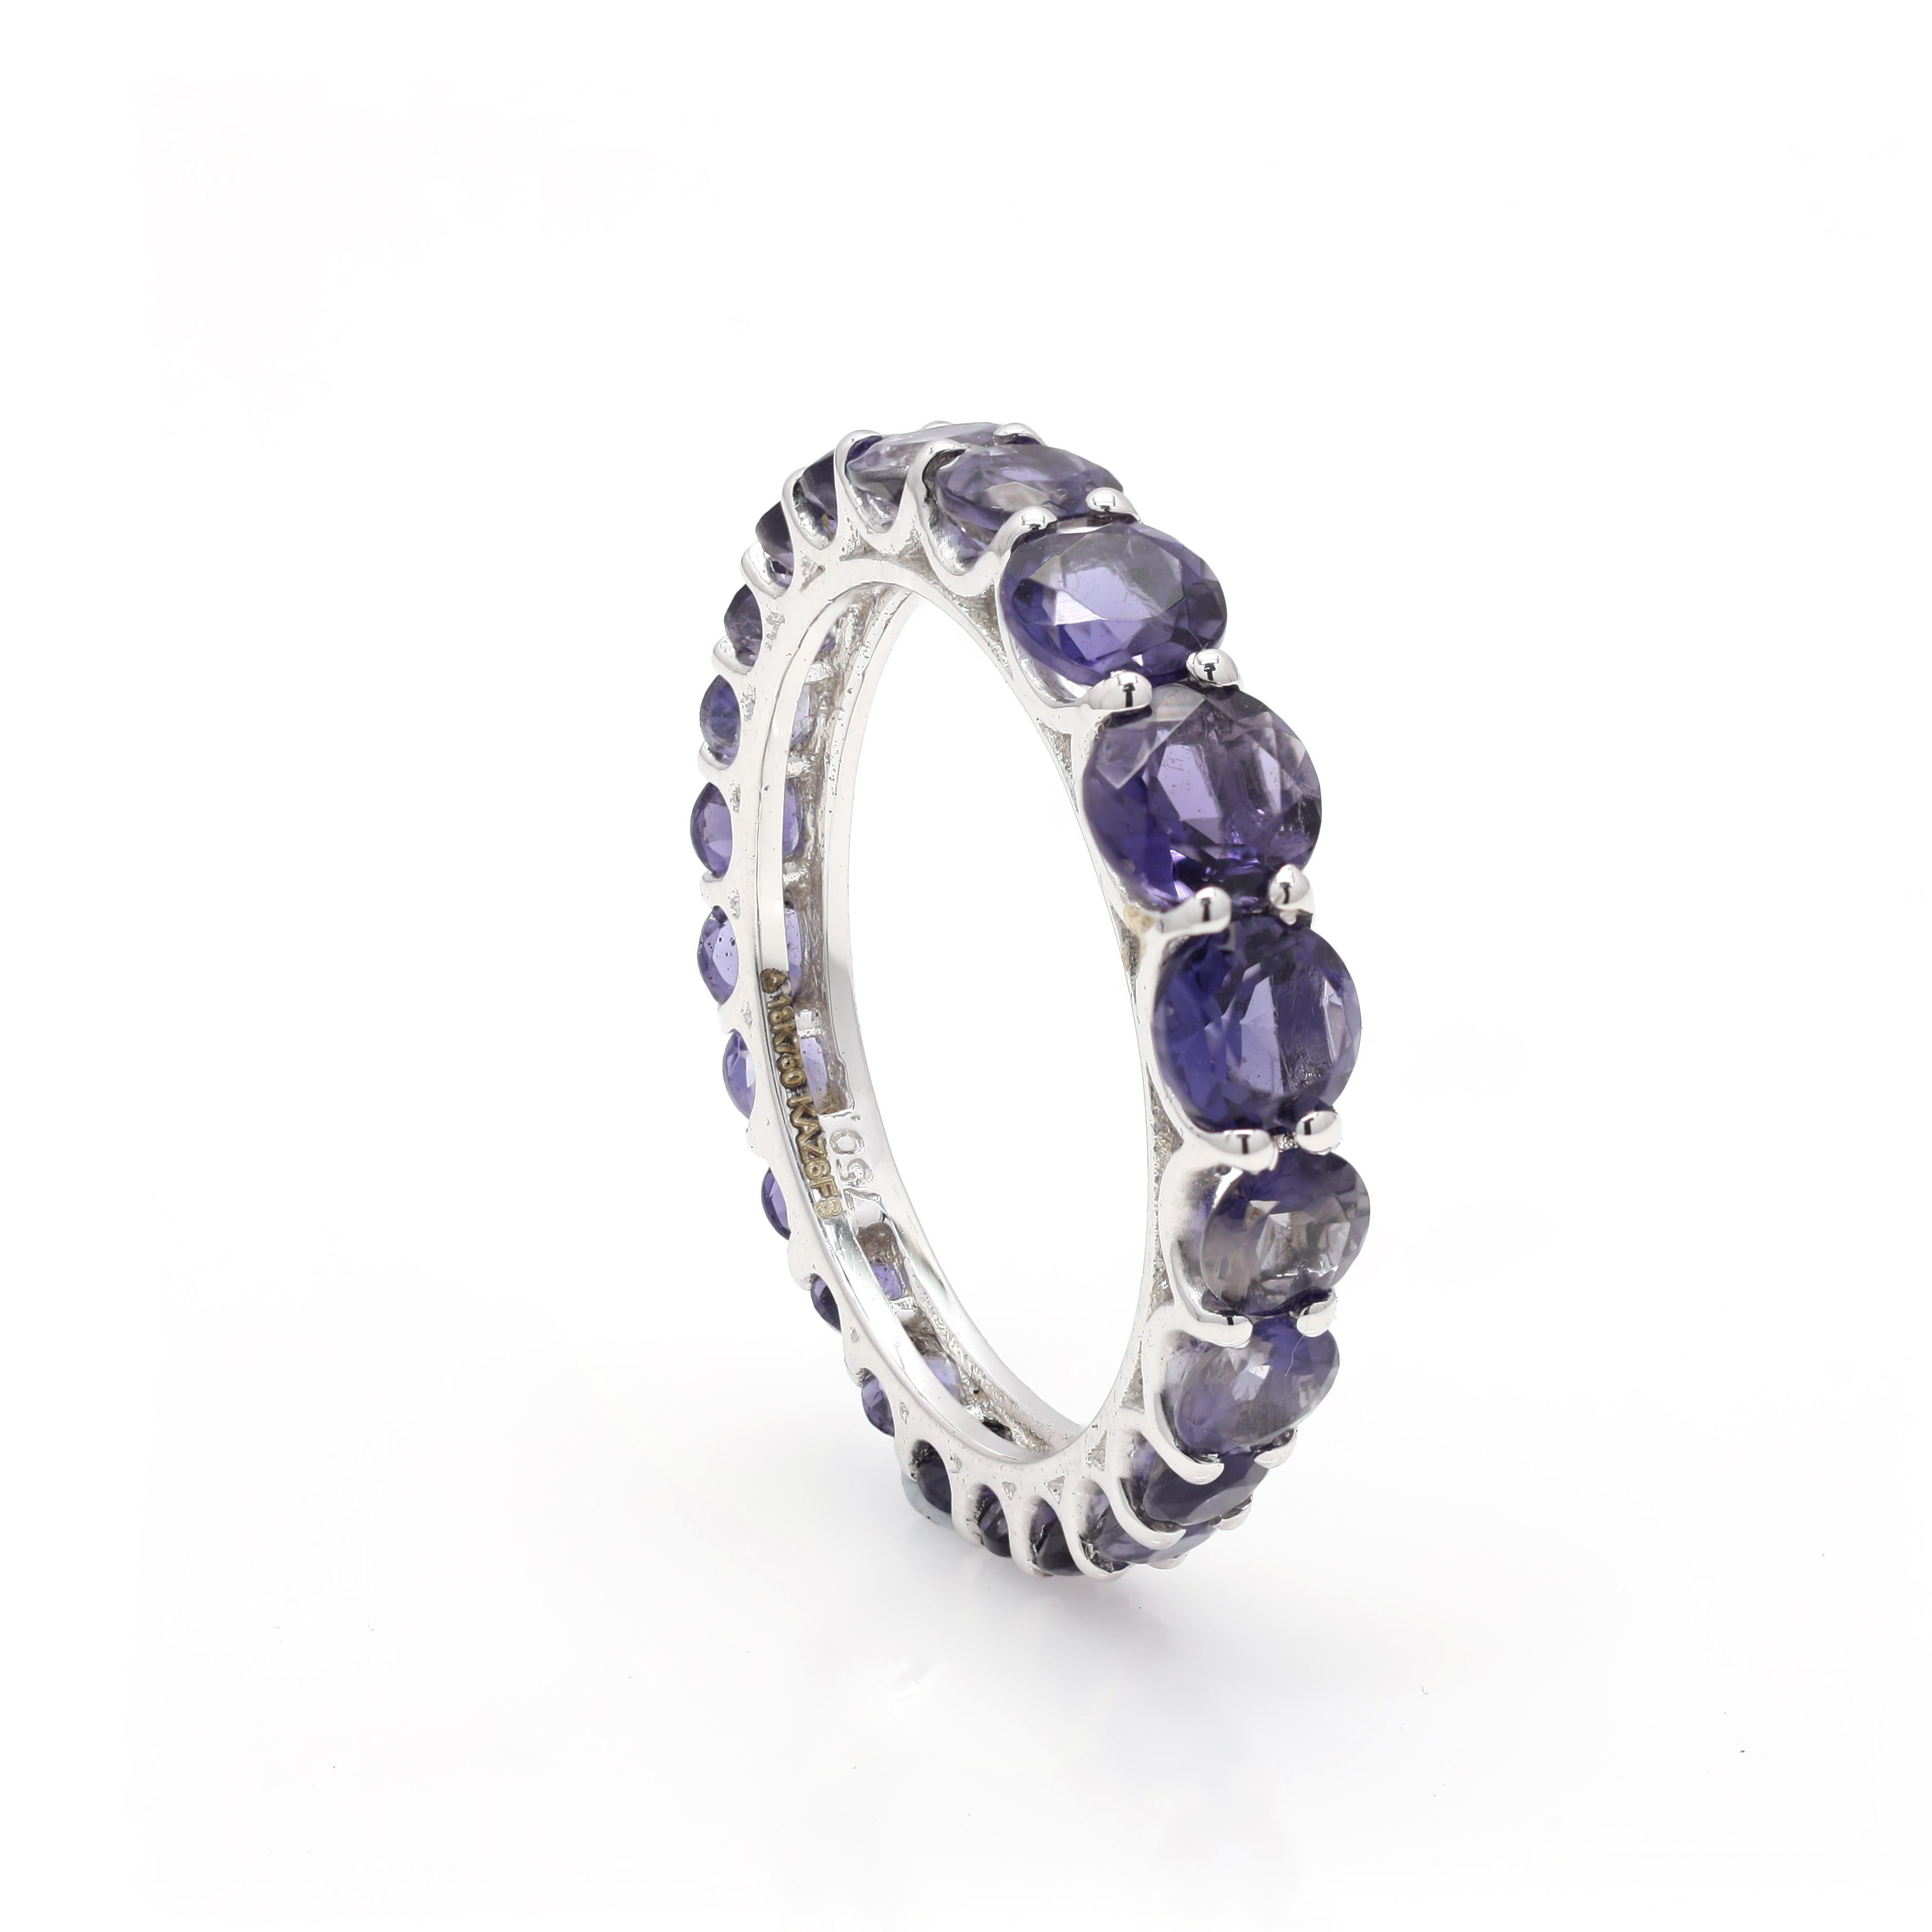 For Sale:  Stackable Eternity 2.27ct Iolite Gemstone Band Ring in 18k White Gold Settings 3